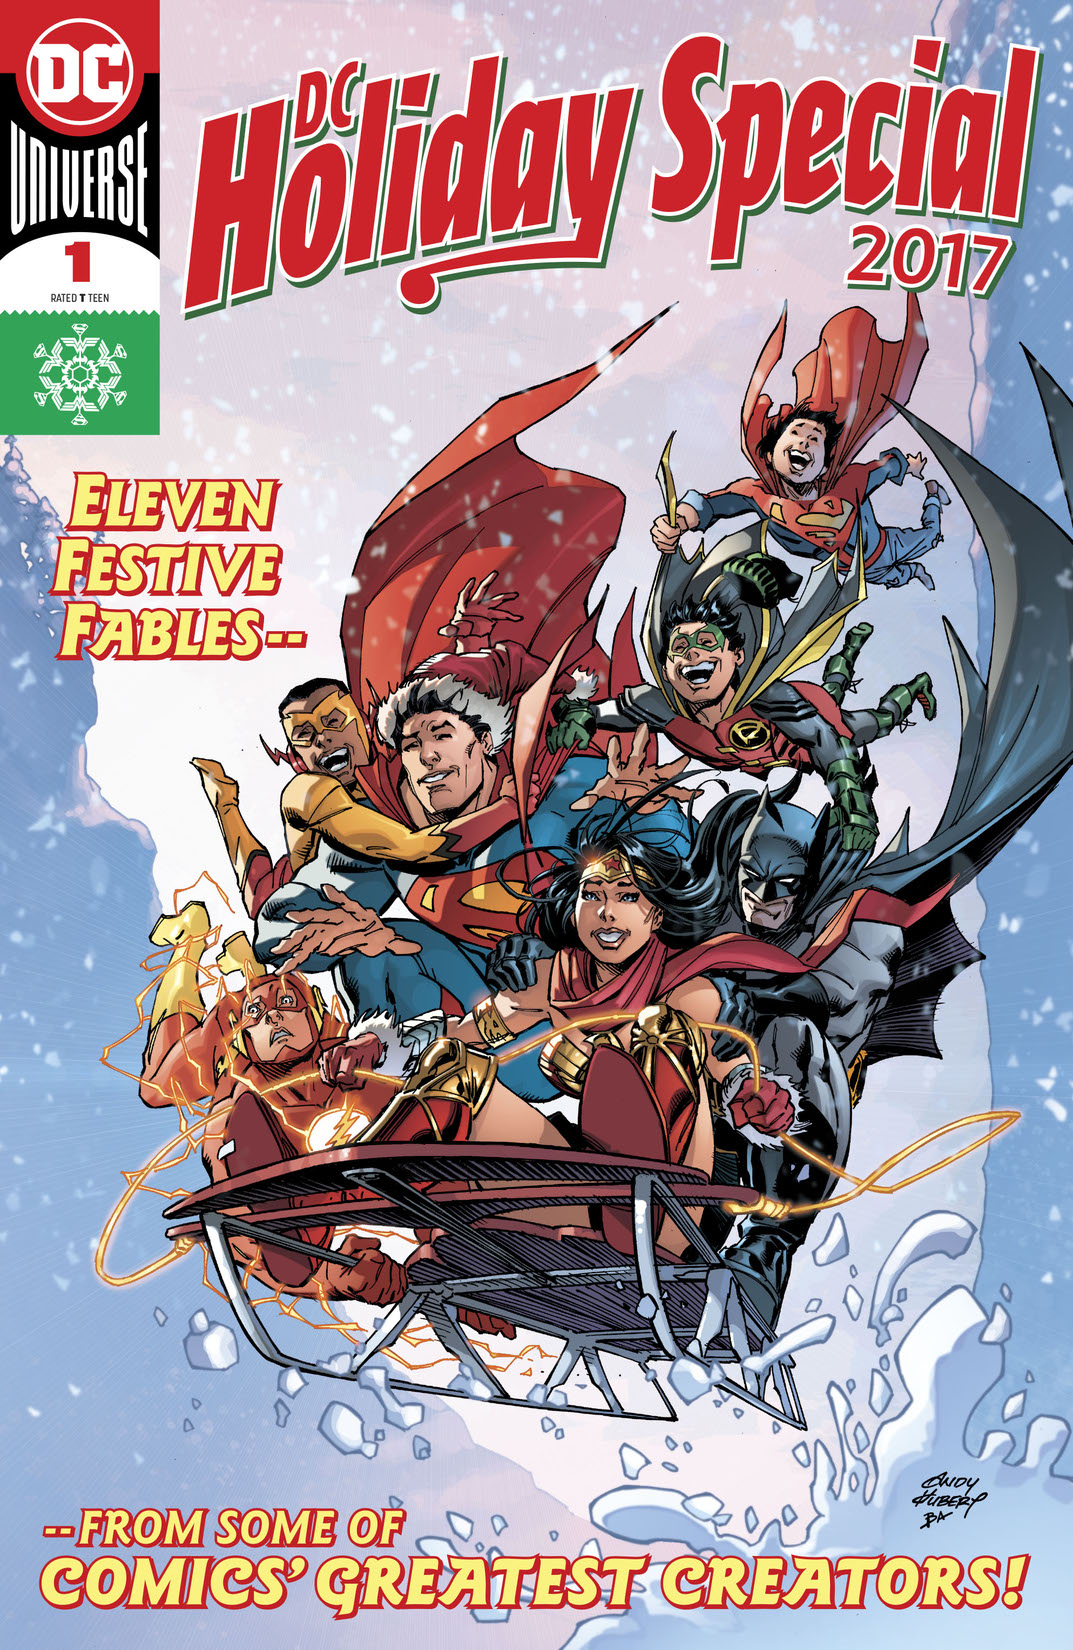 DC Holiday Special 2017 #1 preview images